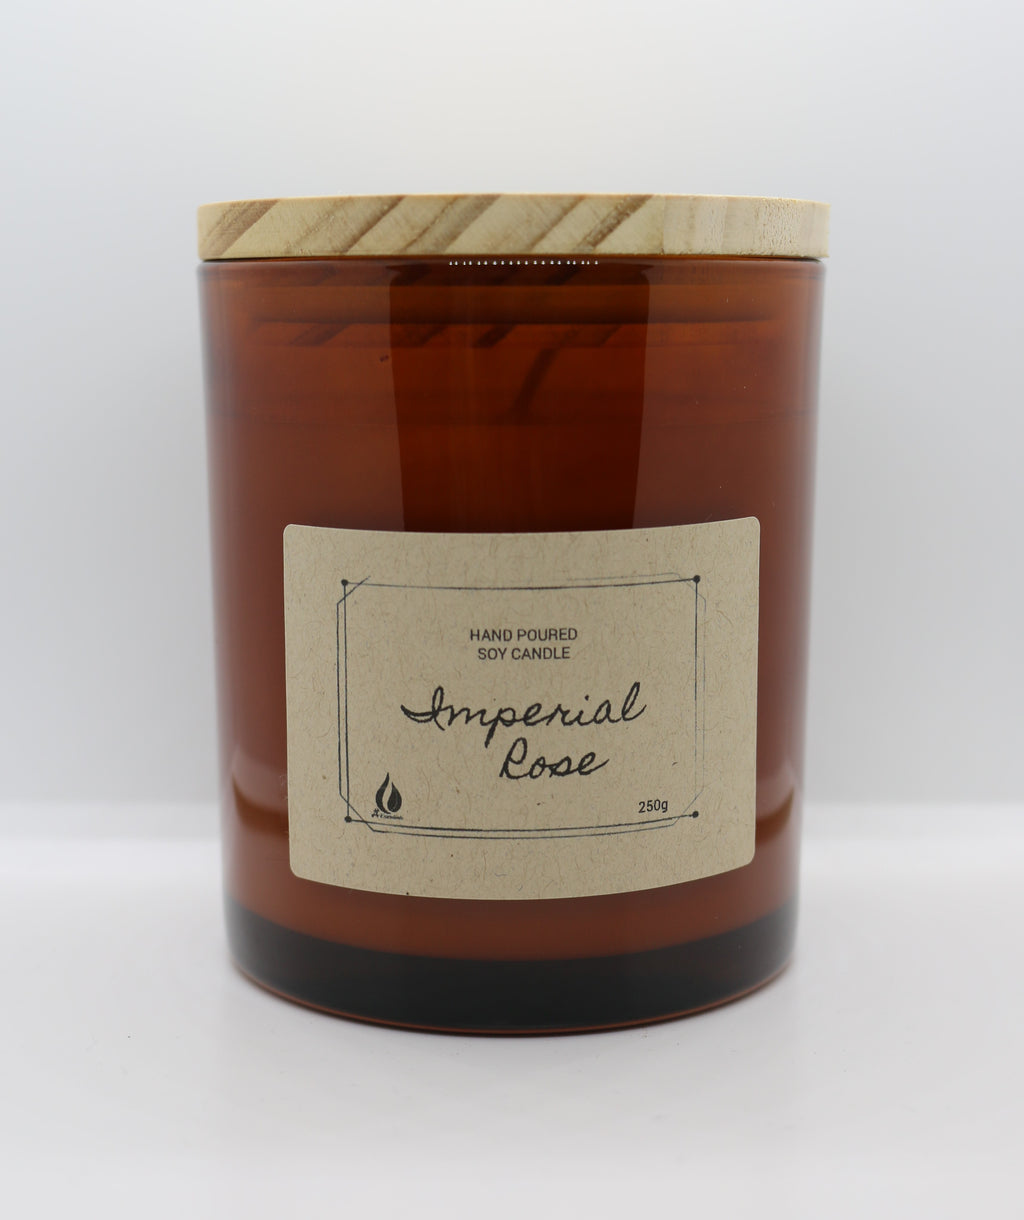 IMPERIAL ROSE - Hand Poured Soy Candle A+ Essentials Pty Ltd